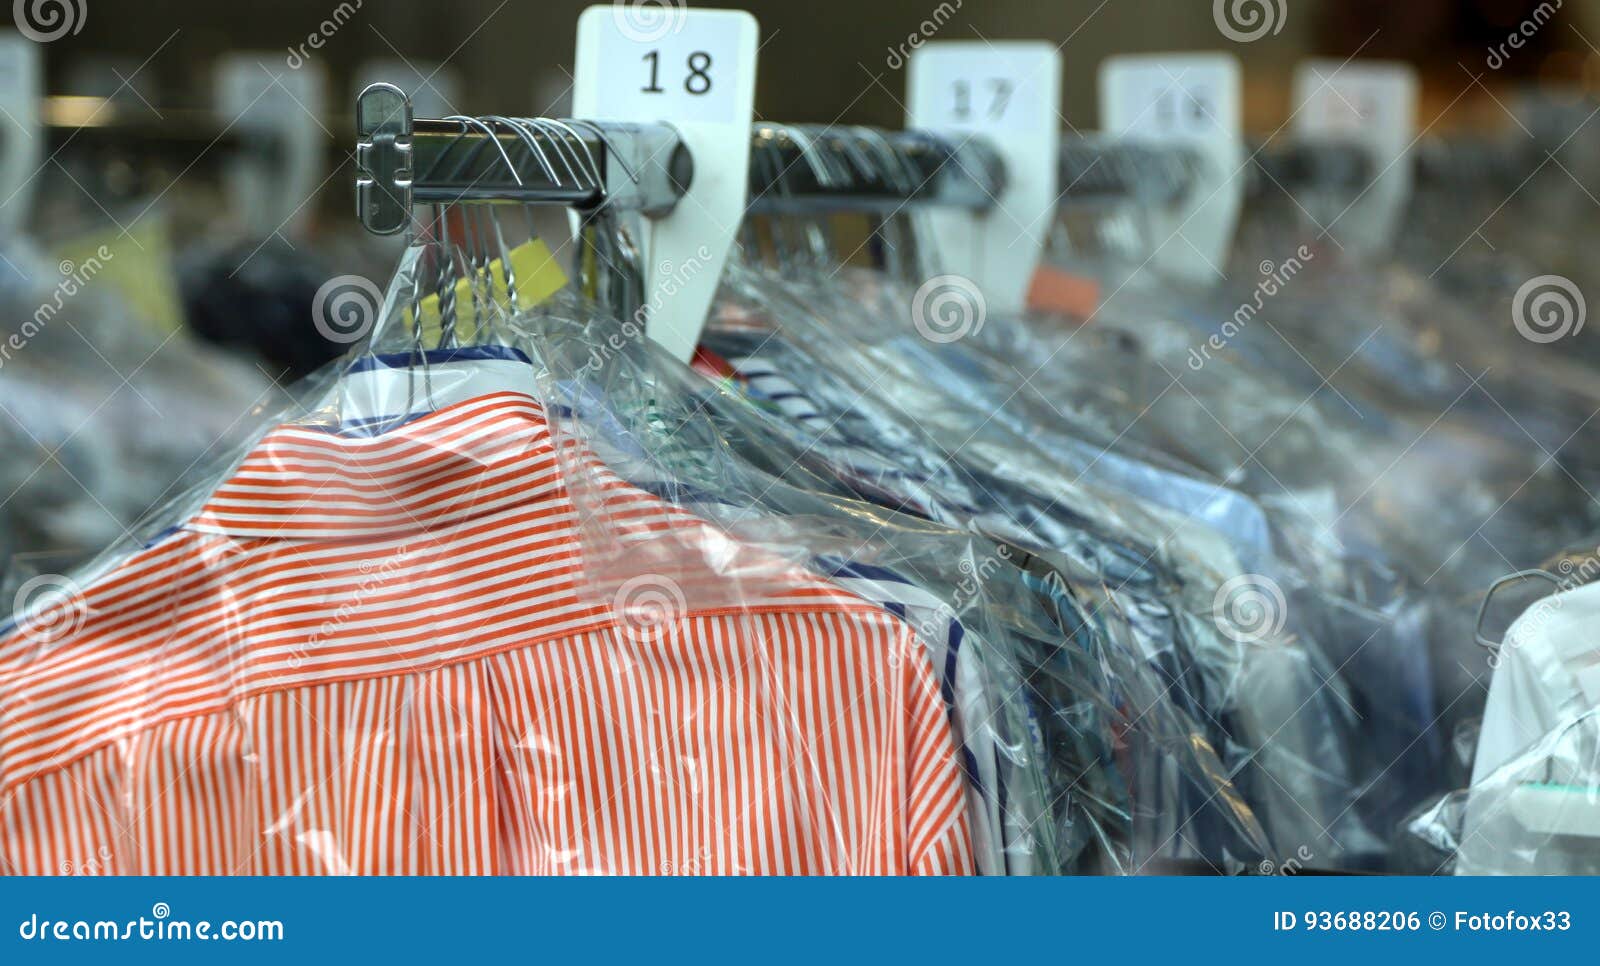 Dry Cleaning Shirts on Hangers in Chemical Cleaning Stock Photo - Image ...